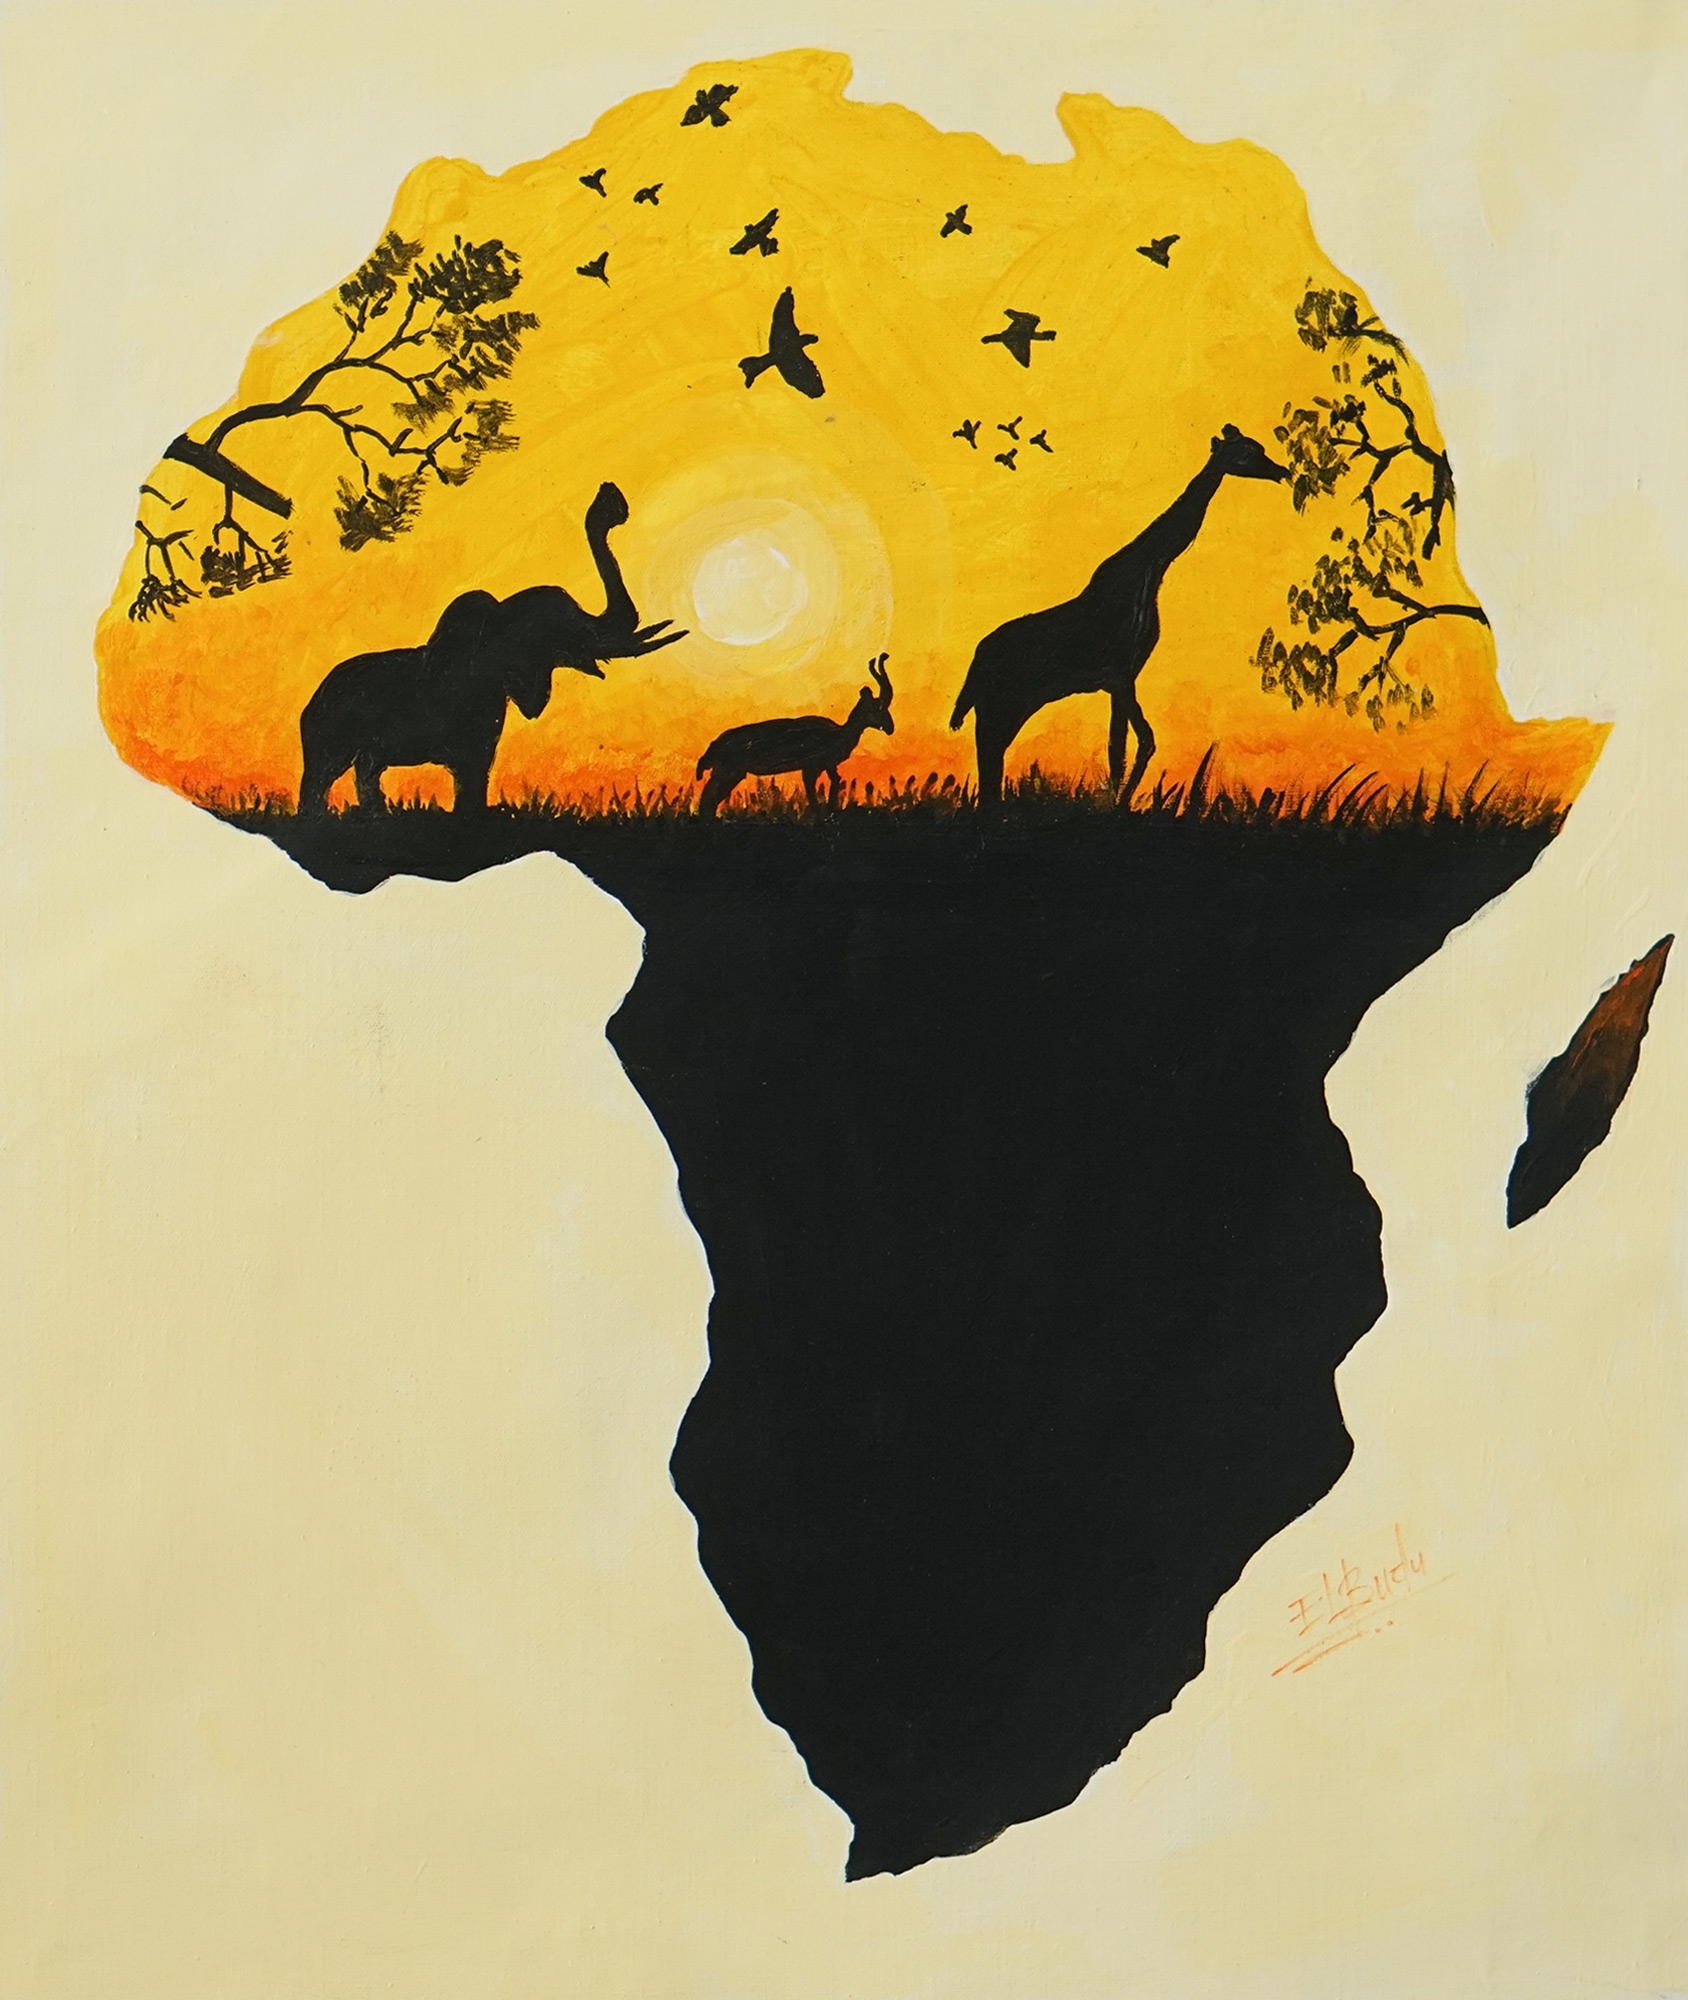 Acrylic Painting of African Continent Silhouette and Animals - African  Safari | NOVICA